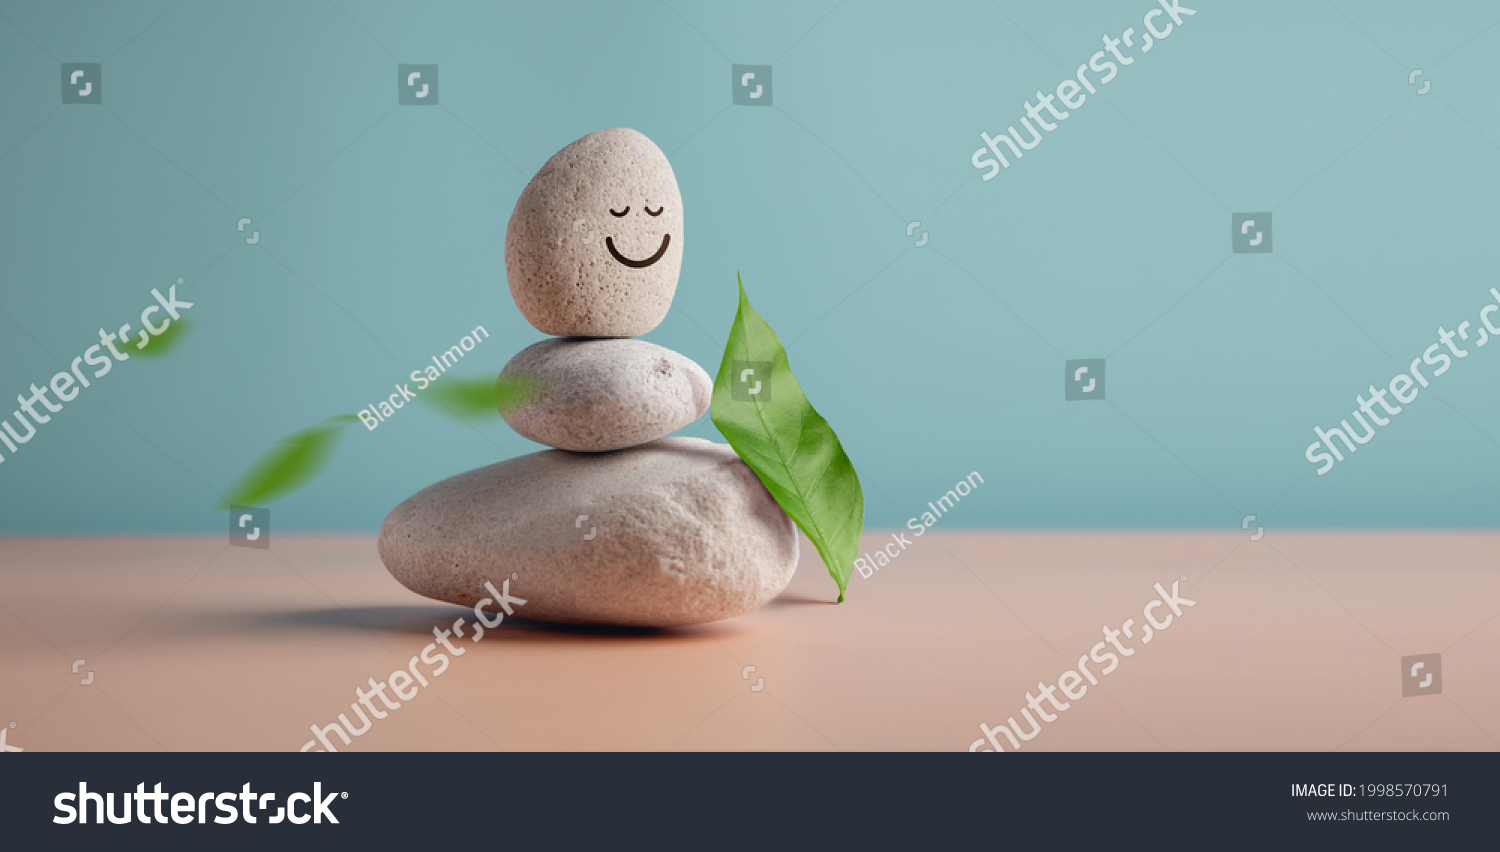 Enjoying Life, Harmony and Positive Mind Concept. Stack of Stable Pebble Stone with Smiling Face Cartoon and Leaf. Serene, Balancing Body, Mind, Soul and Spirit. Mental Health Practice #1998570791